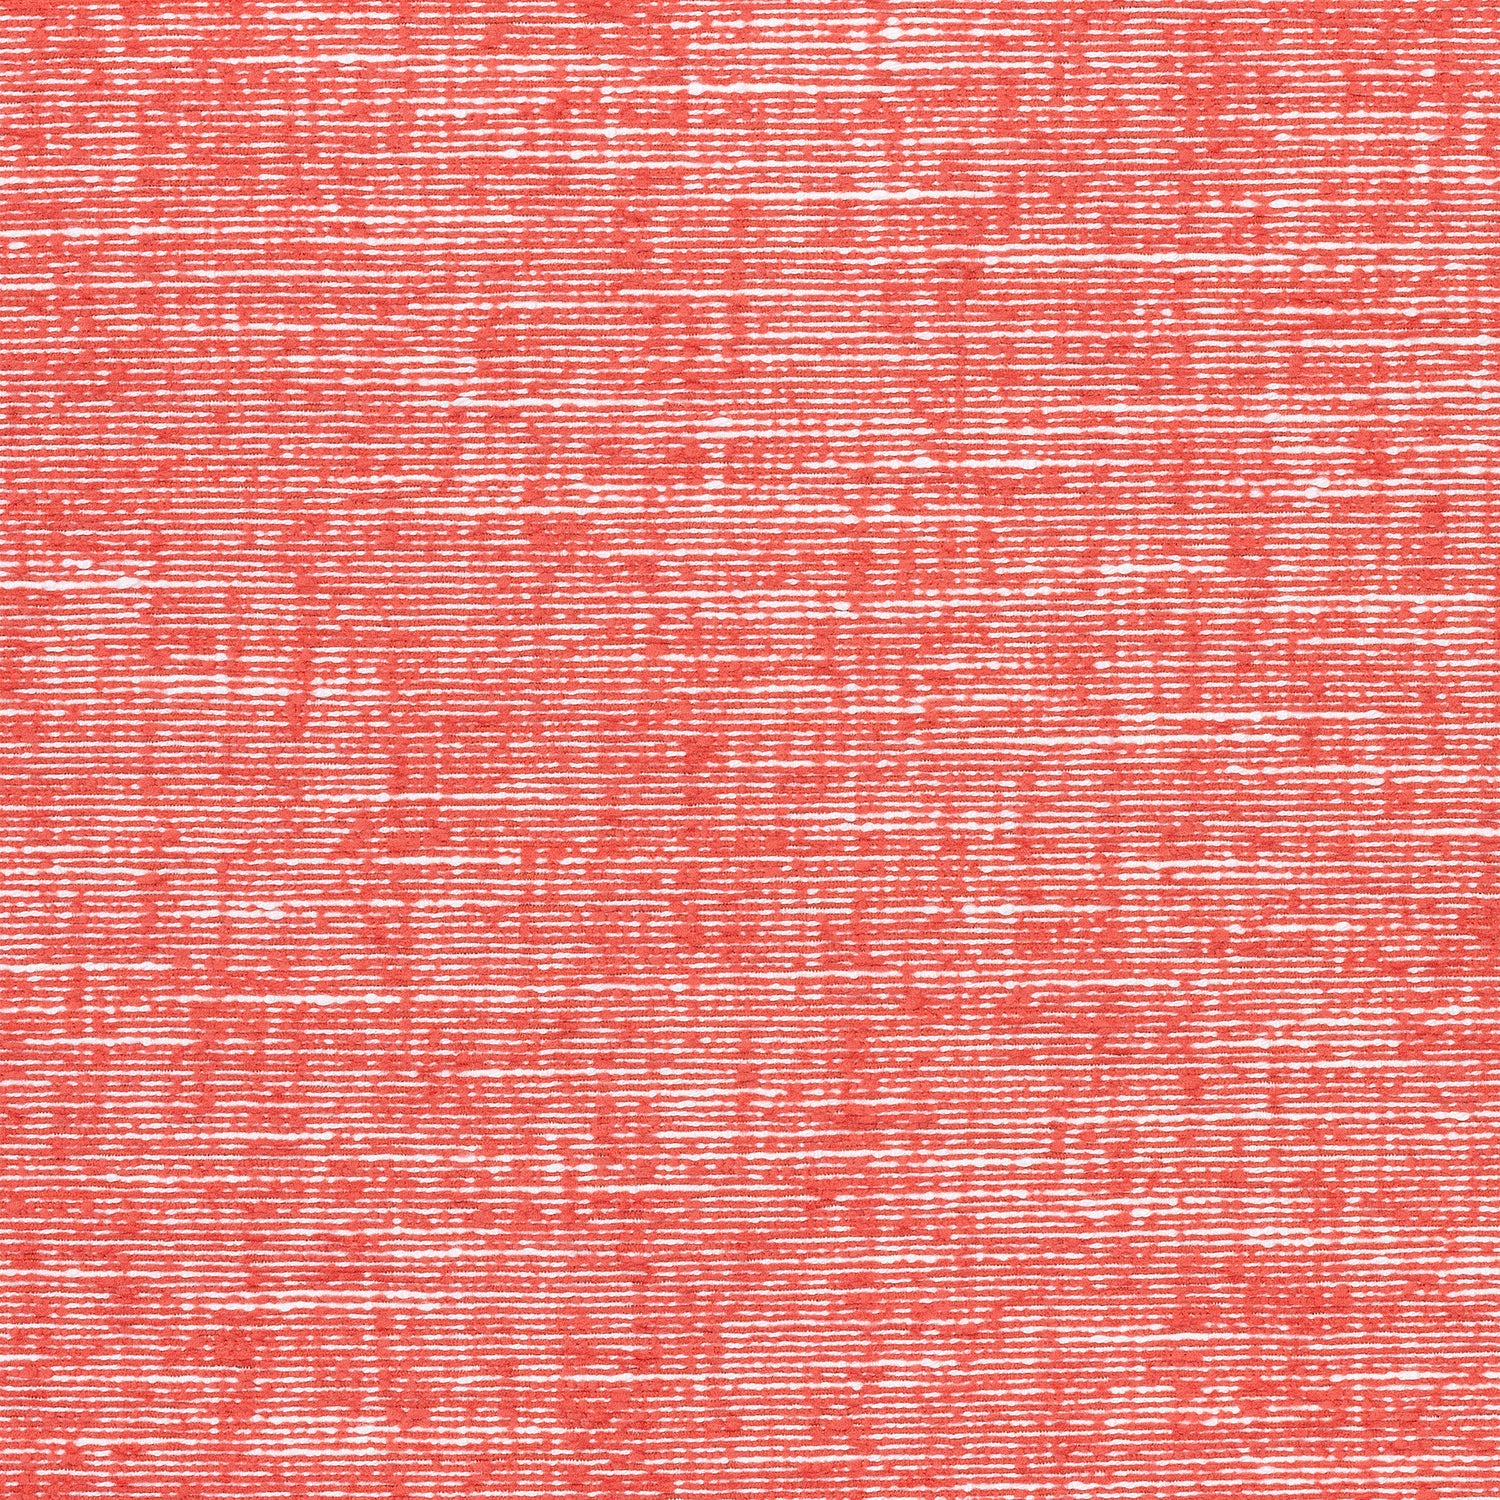 Freeport fabric in coral color - pattern number W74606 - by Thibaut in the Festival collection